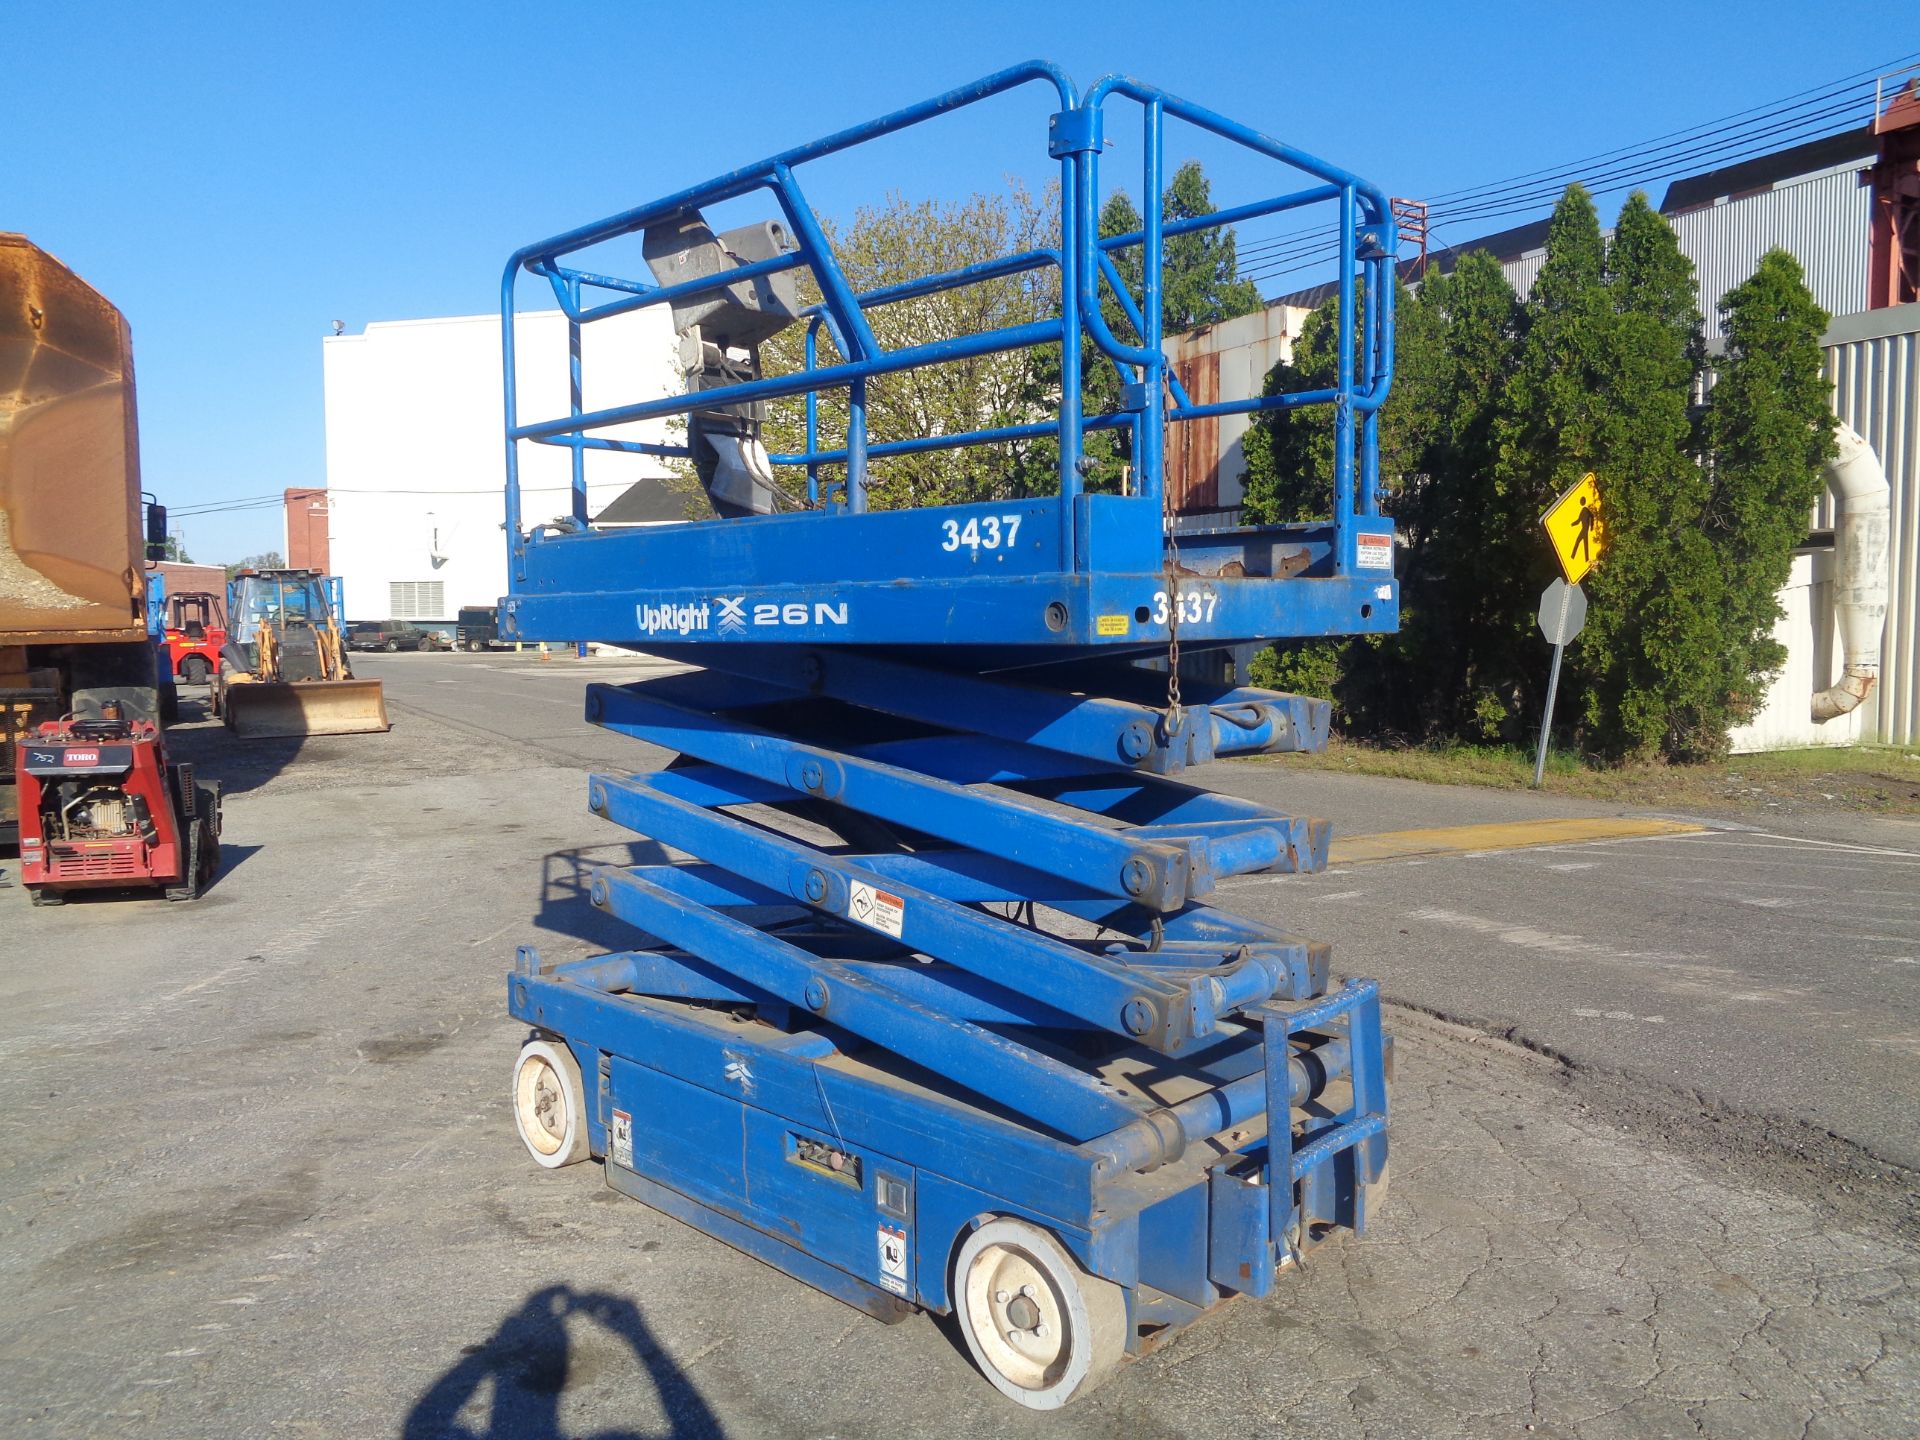 2000 UpRight X26N Scissor Lift - 26Ft Height - Image 11 of 27